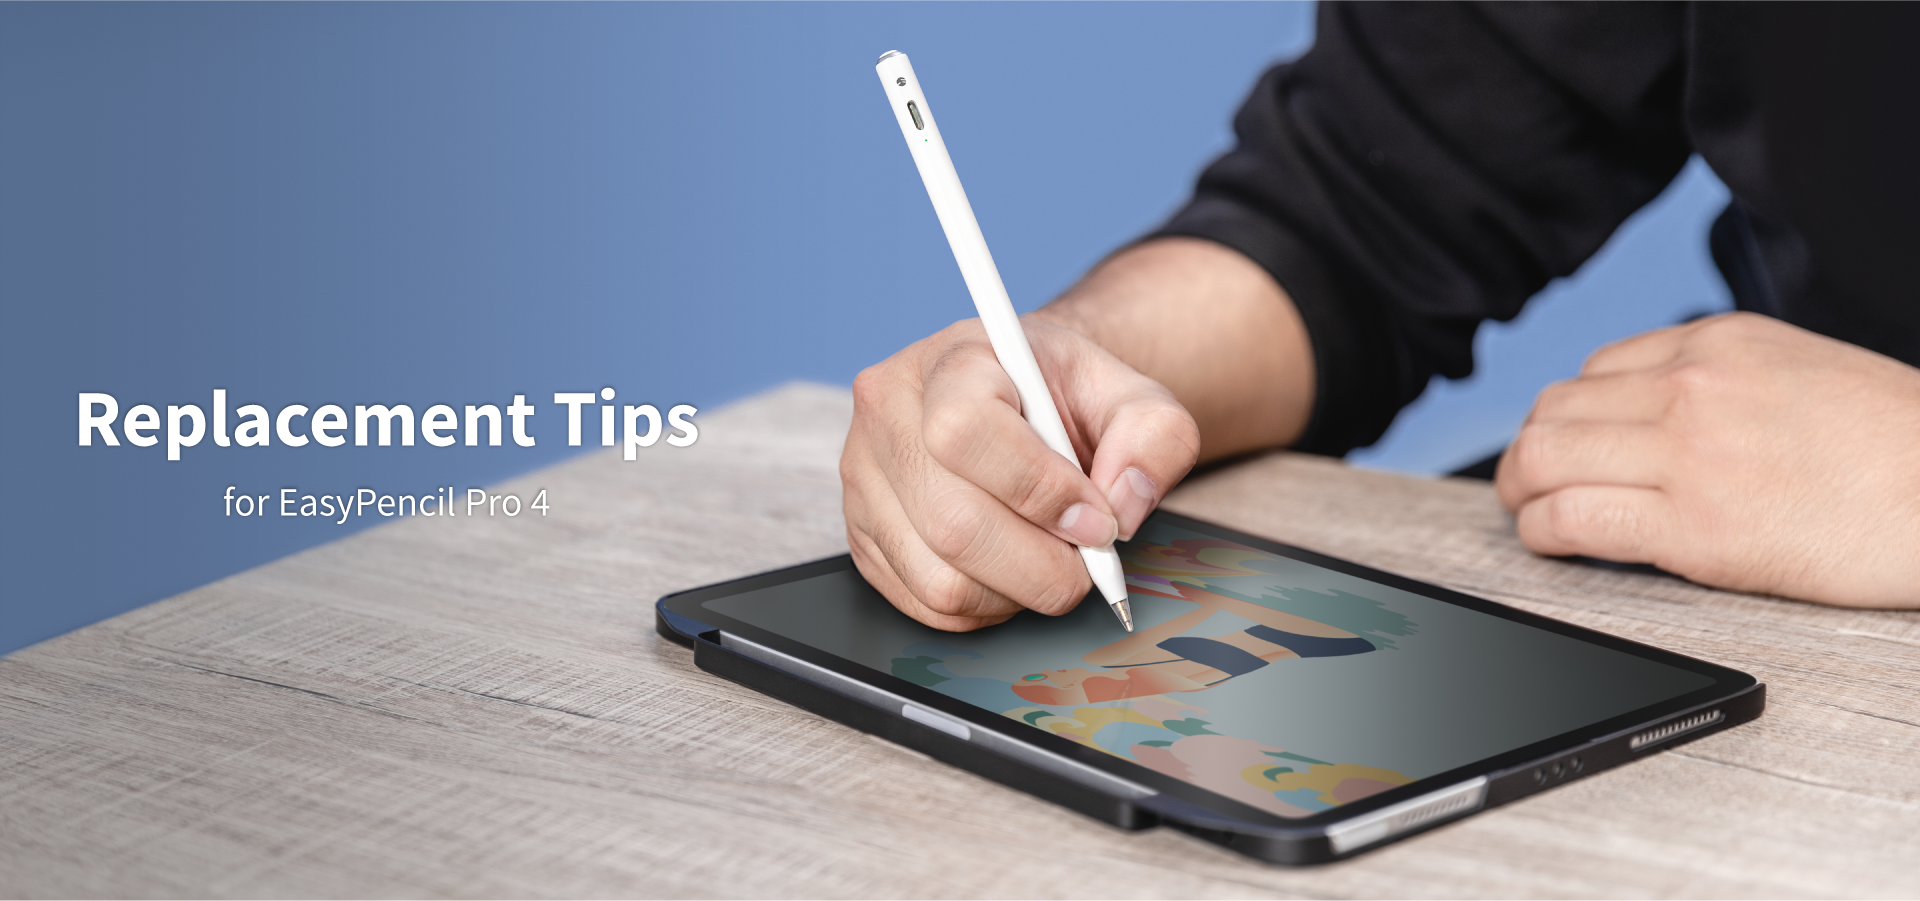 Replacement Tips for EasyPencil Pro 4